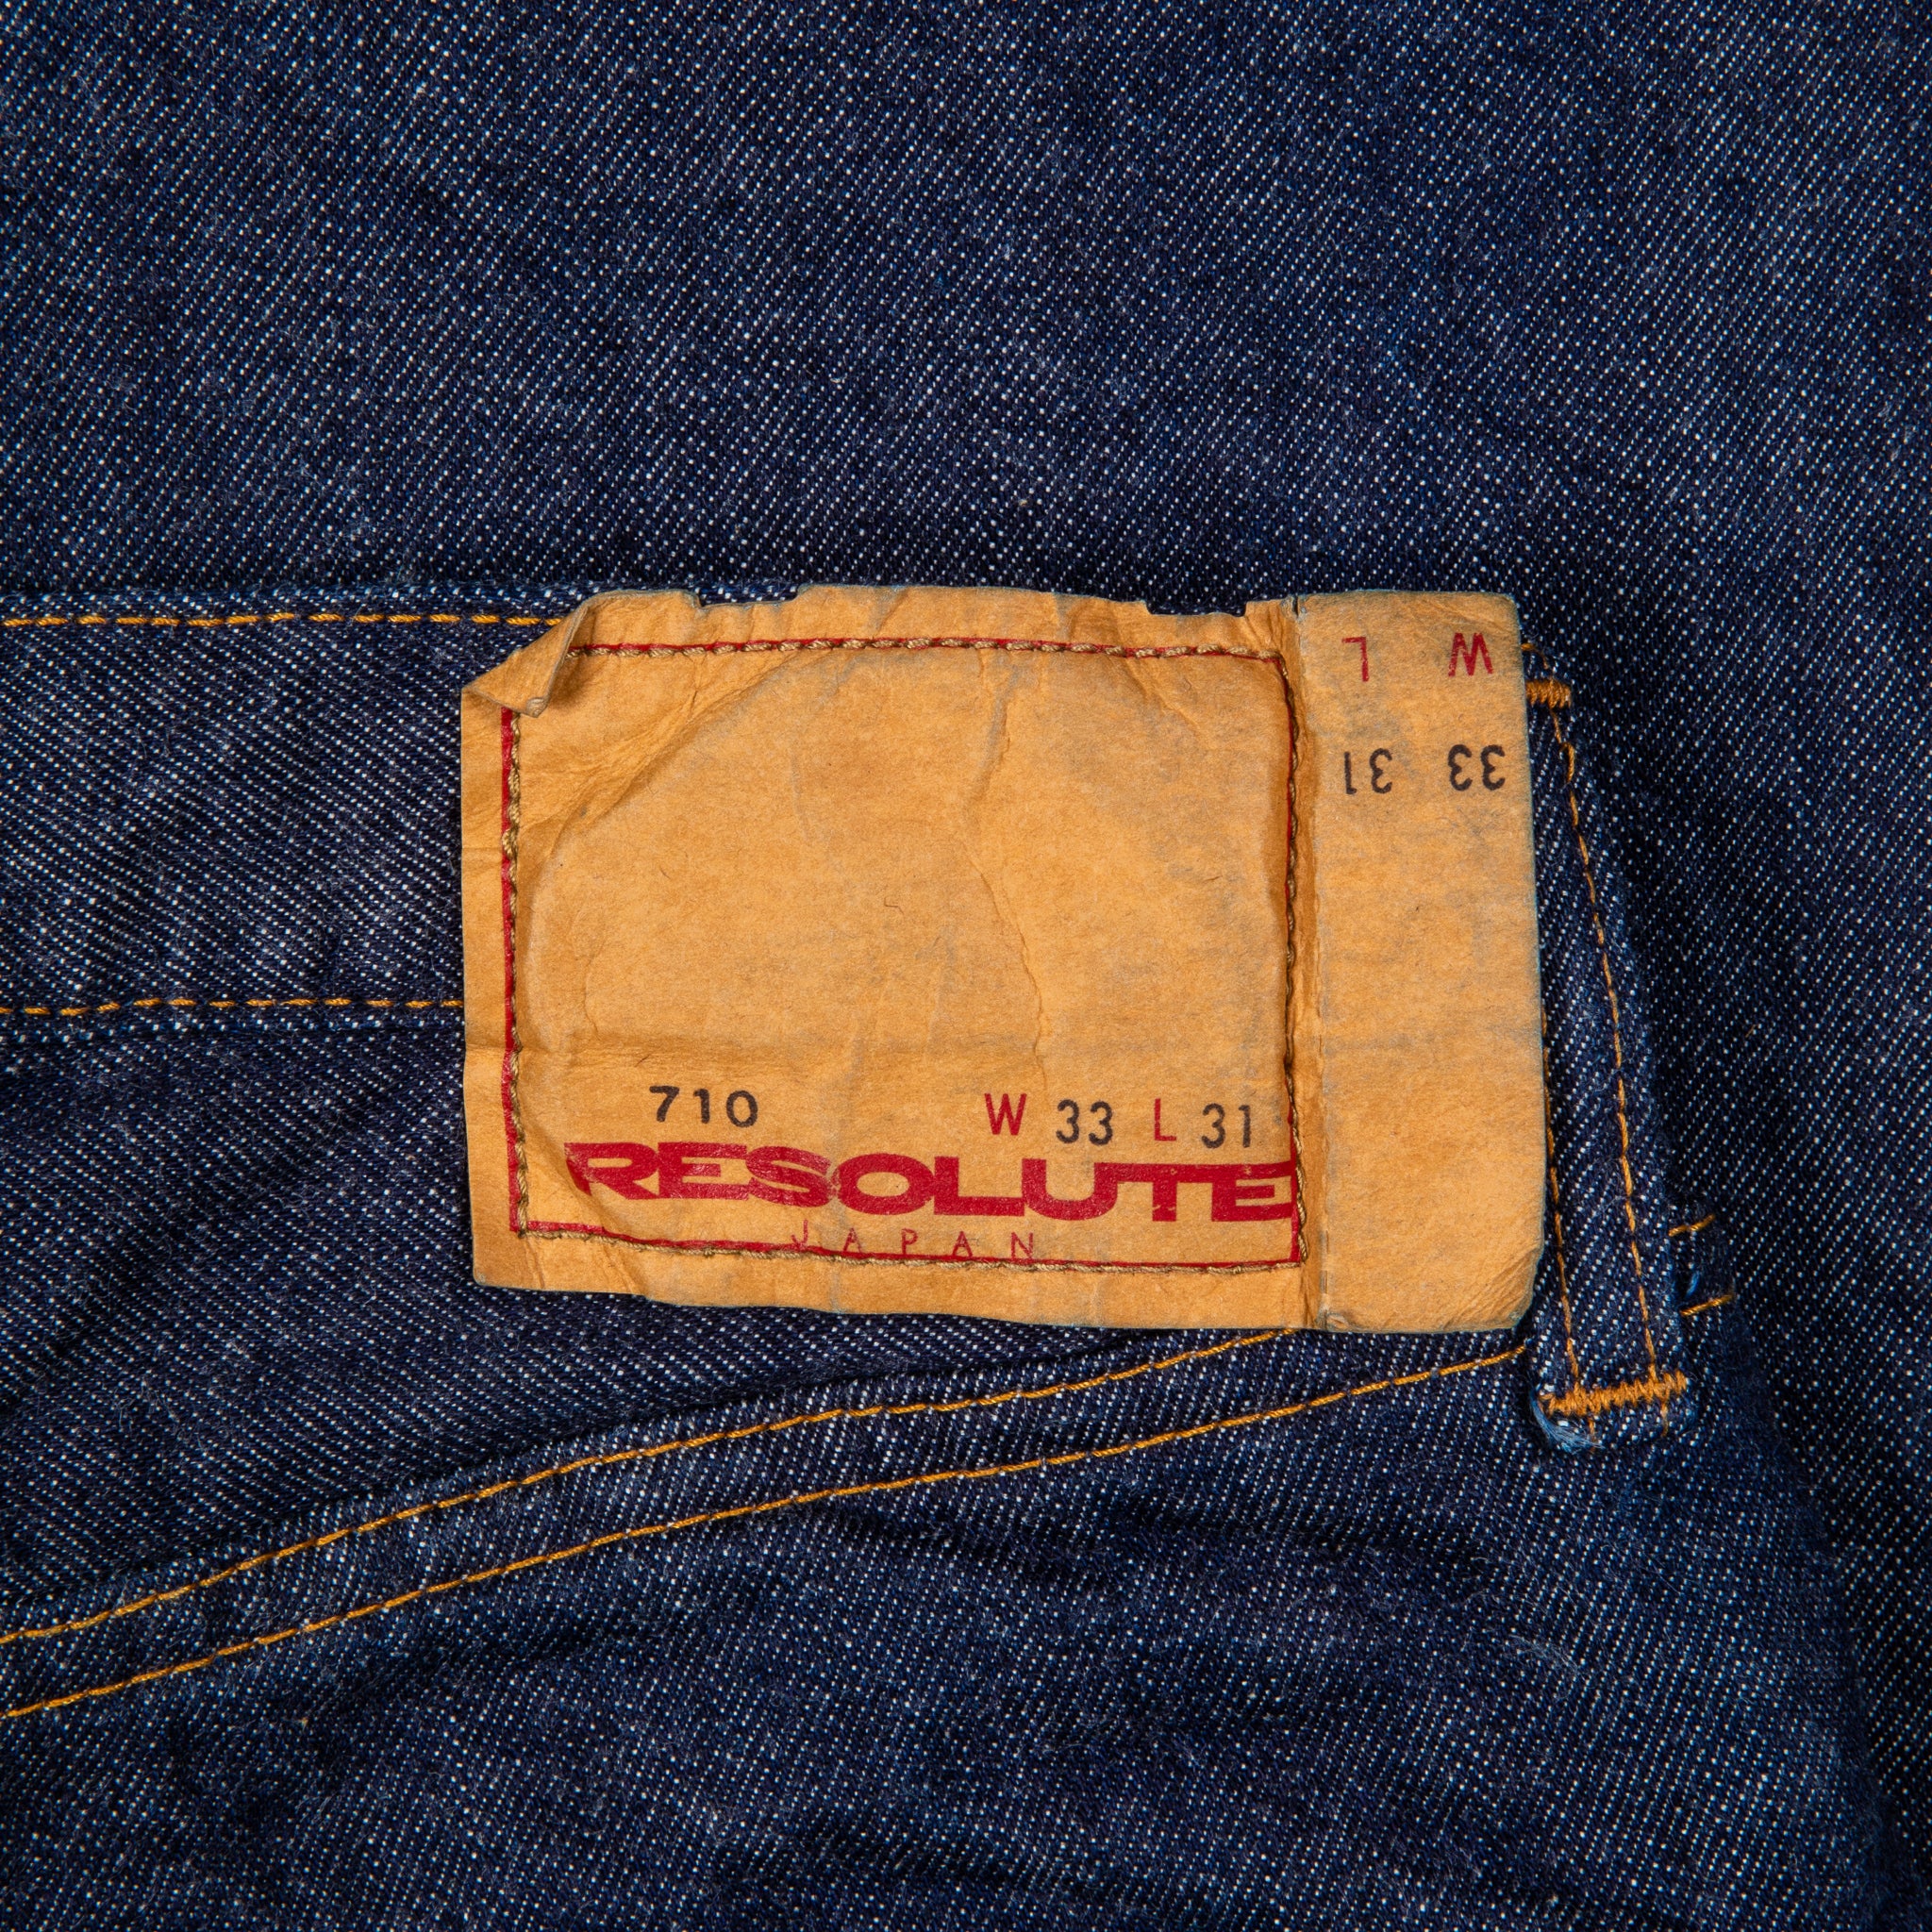 Resolute 710 rinsed – Frans Boone Store